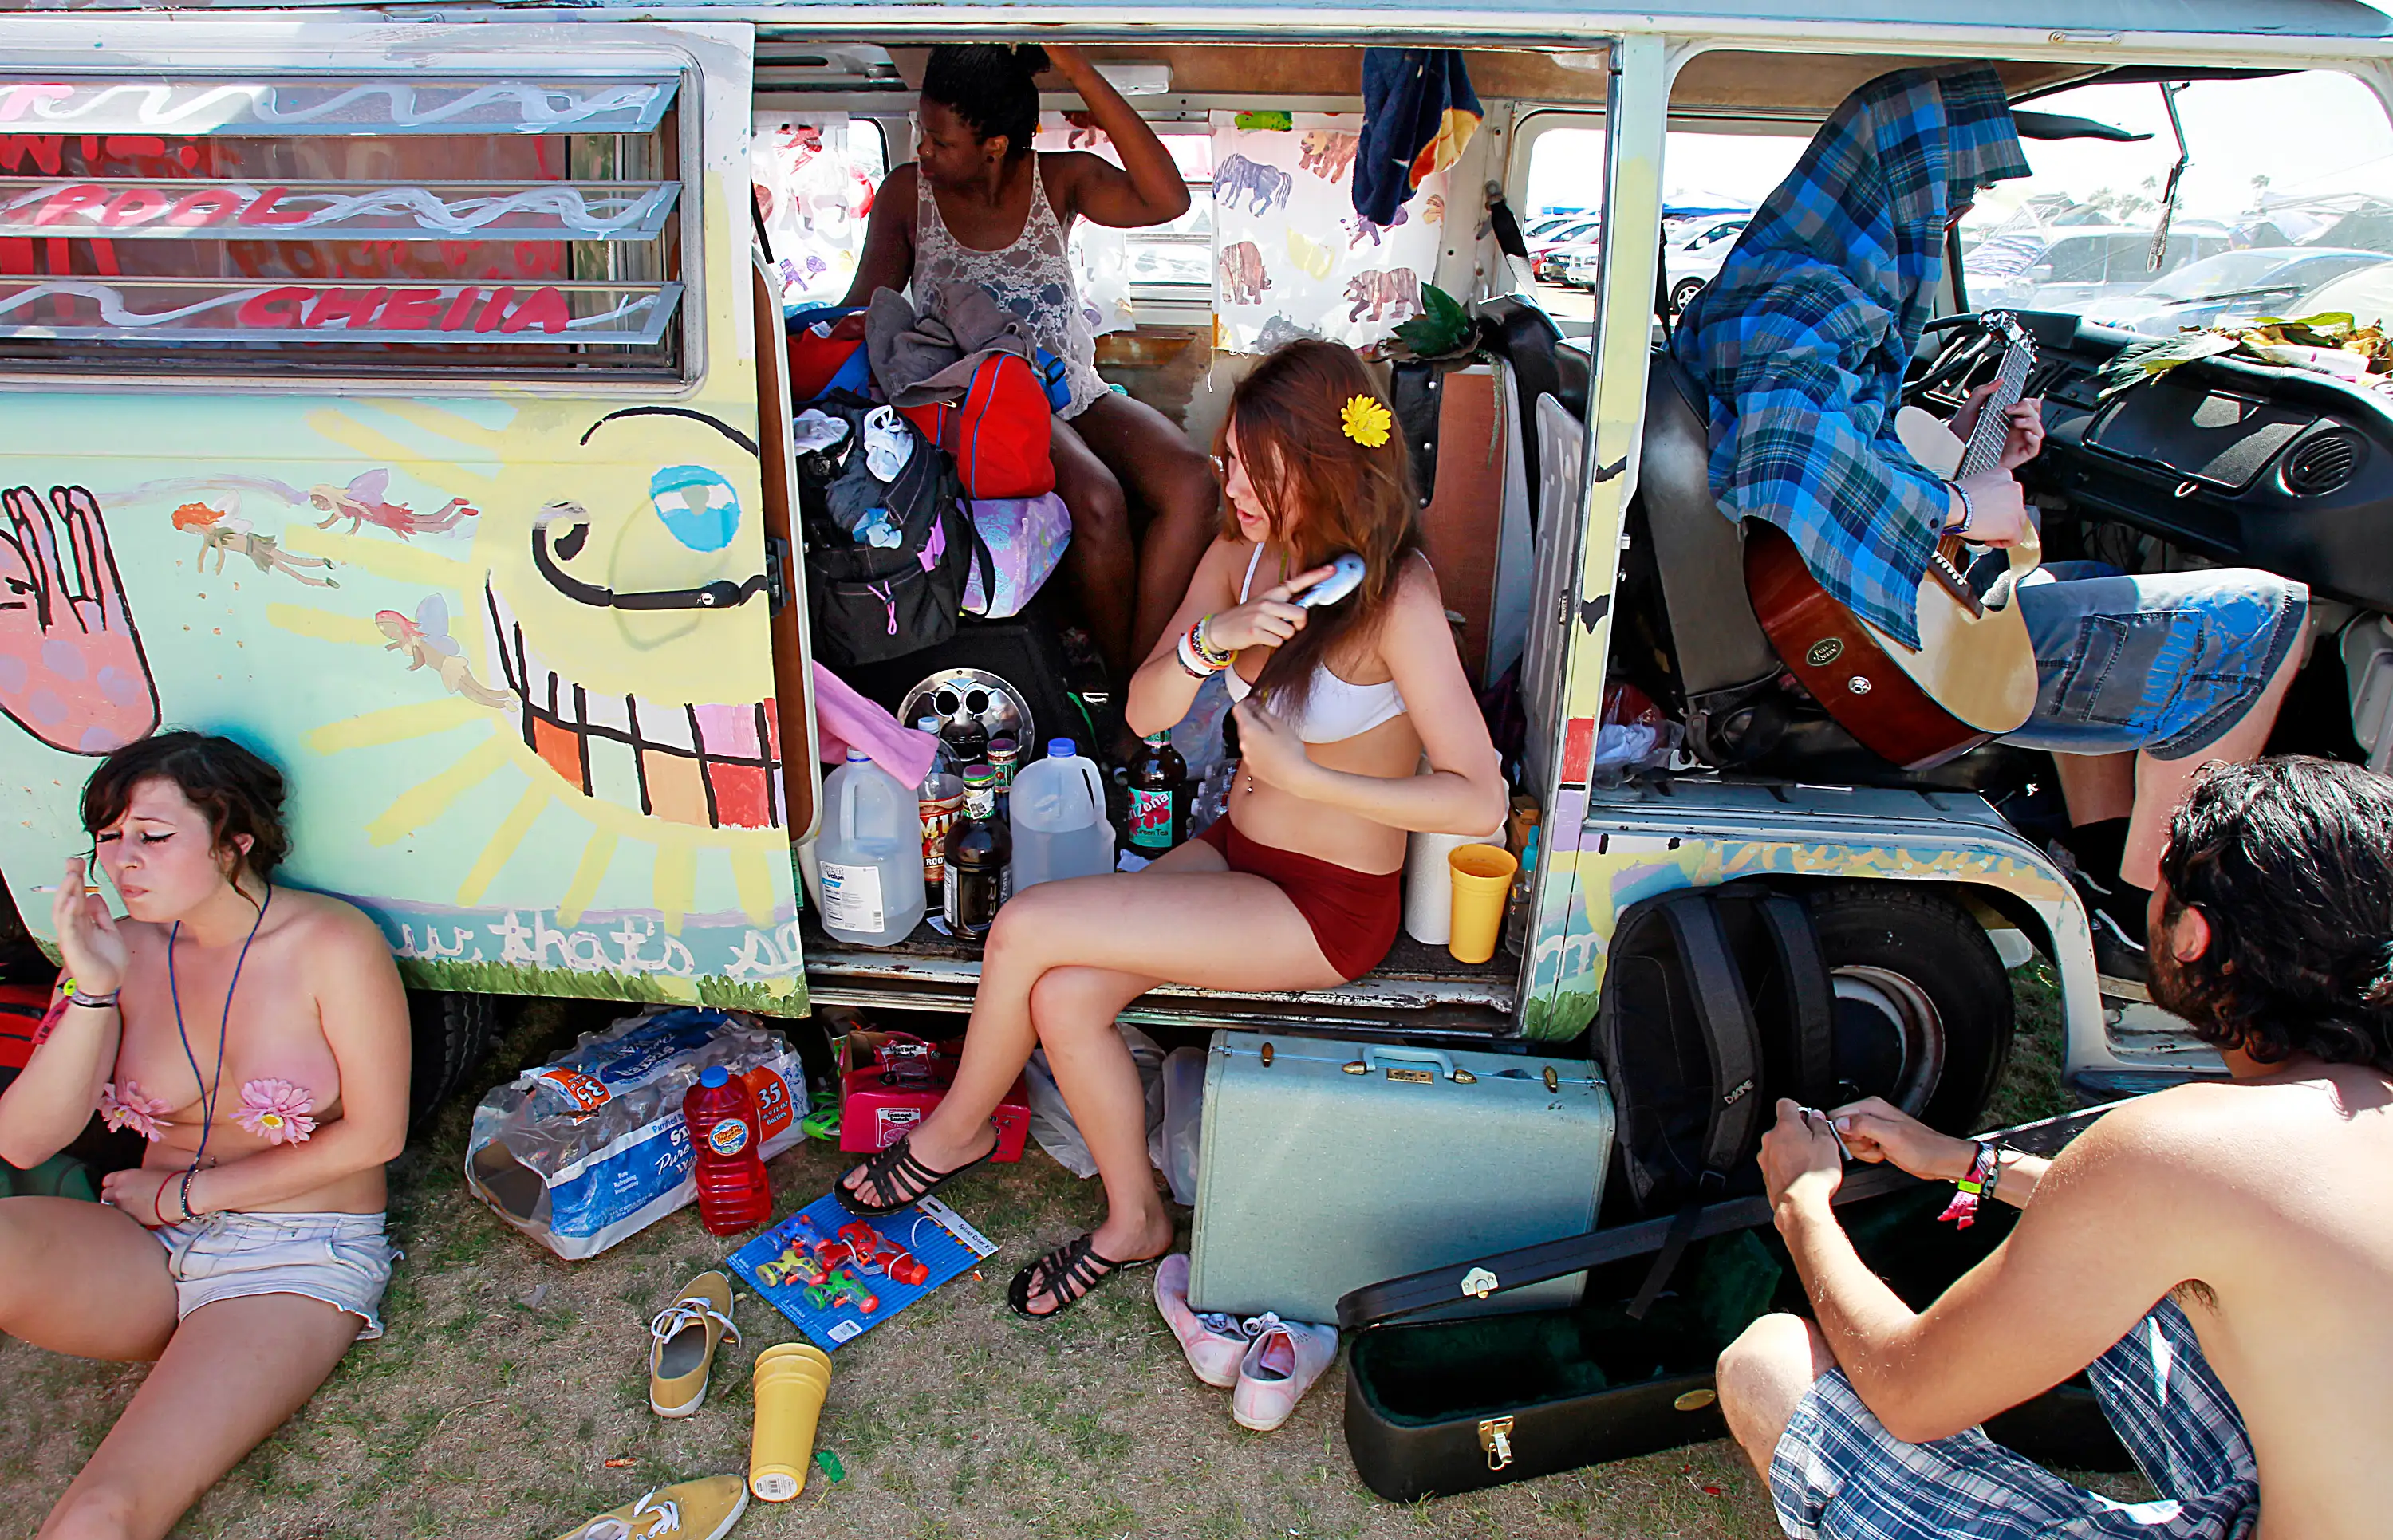 A group of festivalgoers chill out at an onsite campground Sunday, April 17, 2011, at the Coachella